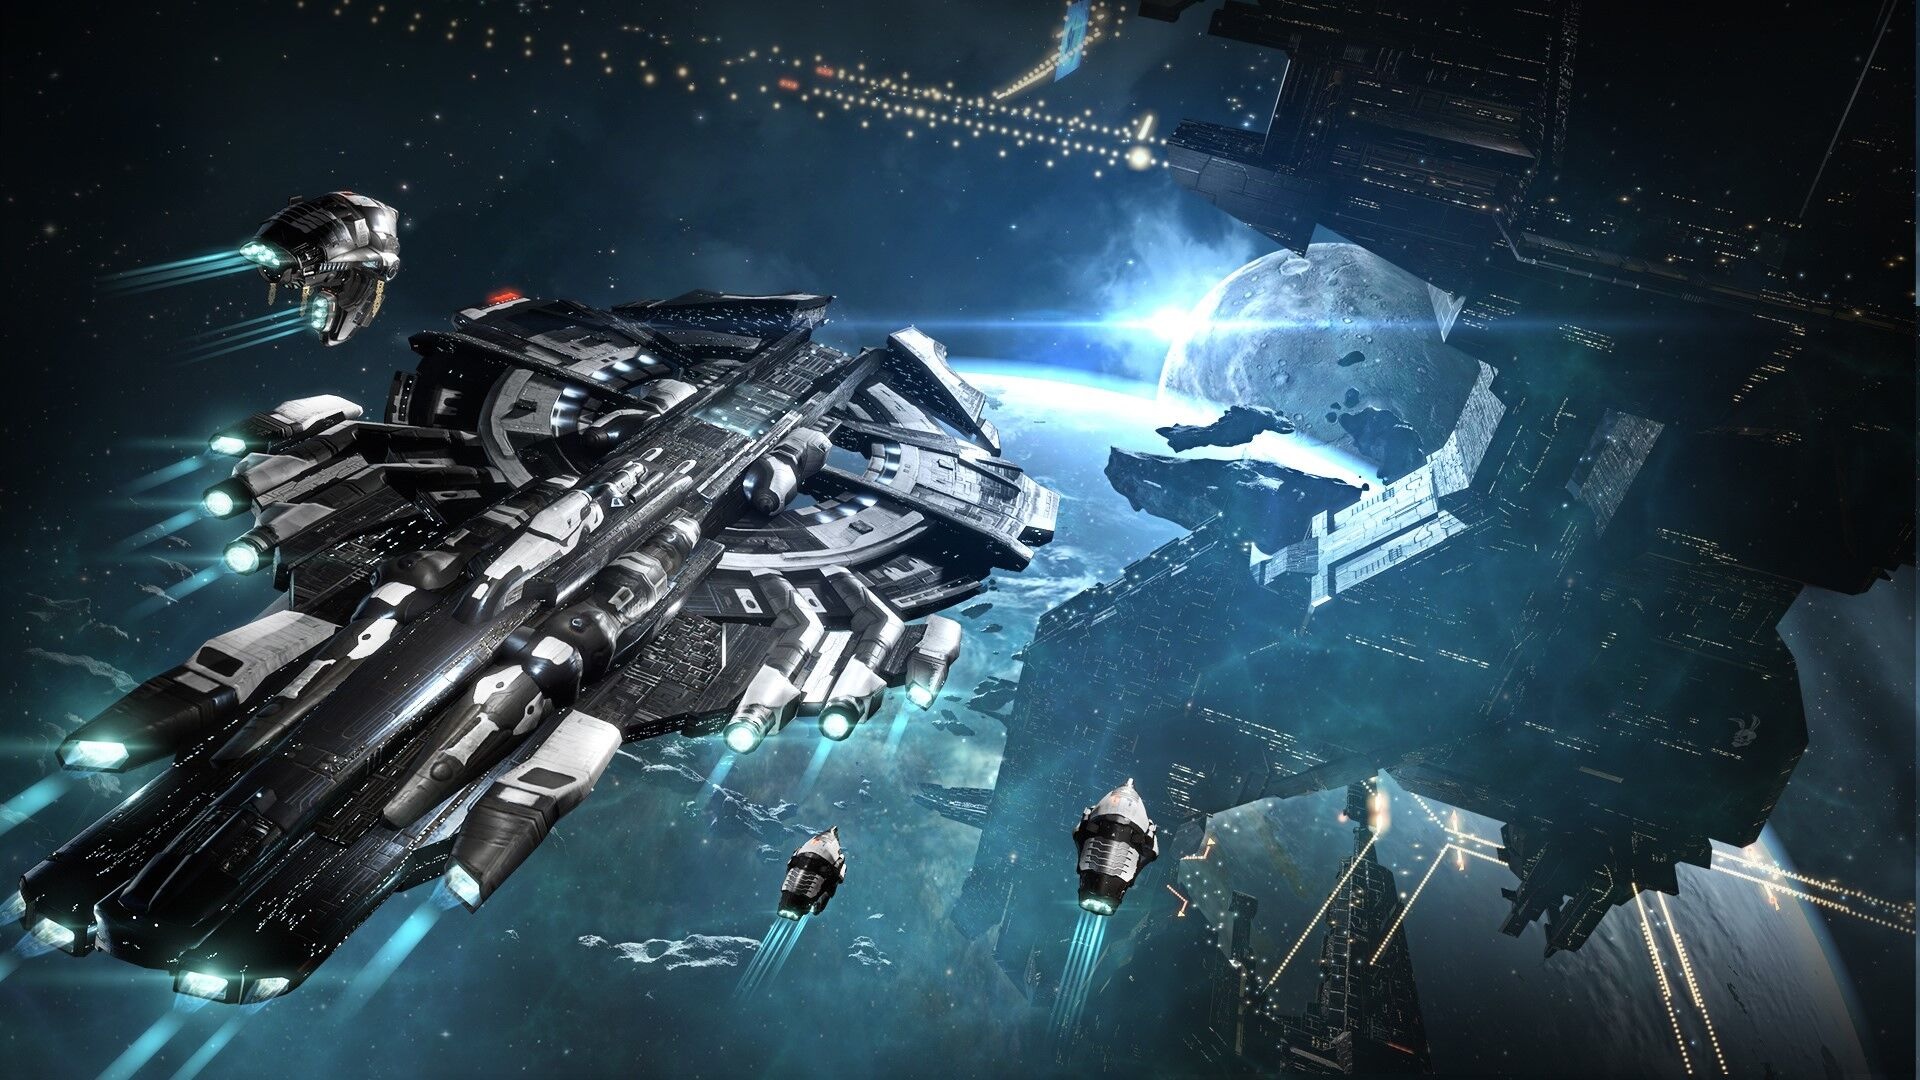 Eve Online is getting DirectX 12 and “some pretty serious threats” in 2019